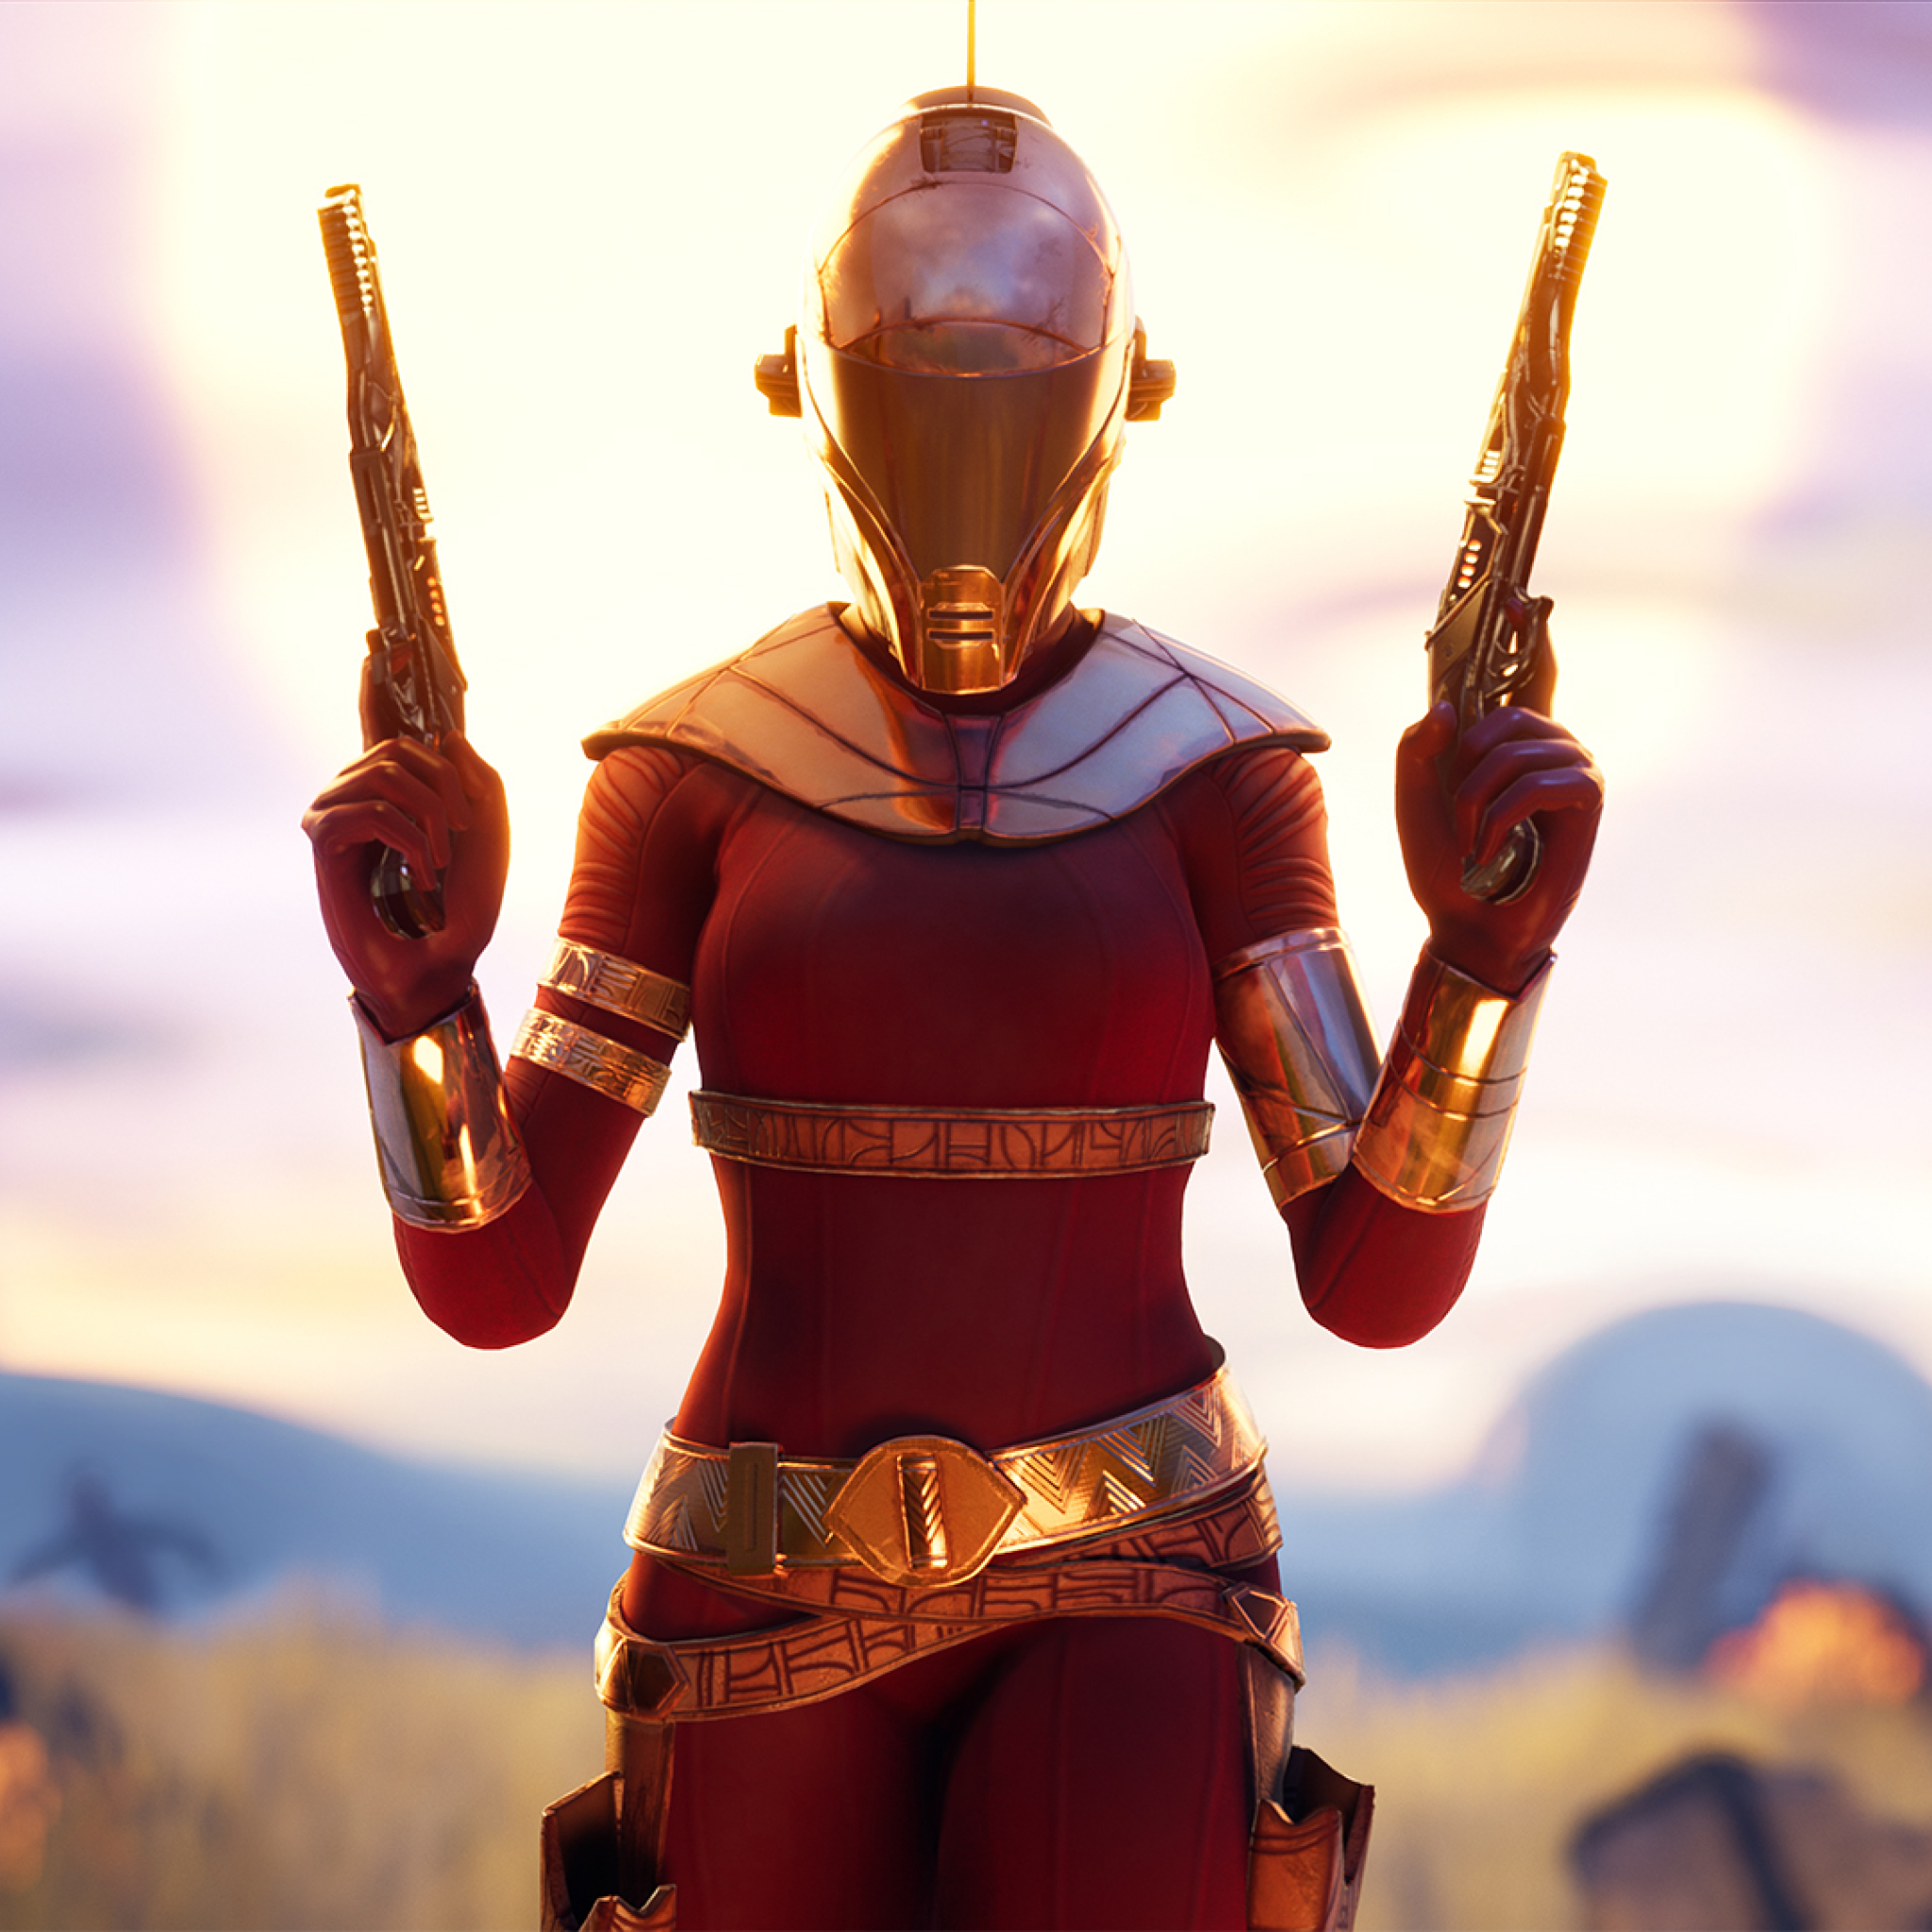 Zorii Bliss Fortnite Outfit Ipad Air Wallpaper, HD